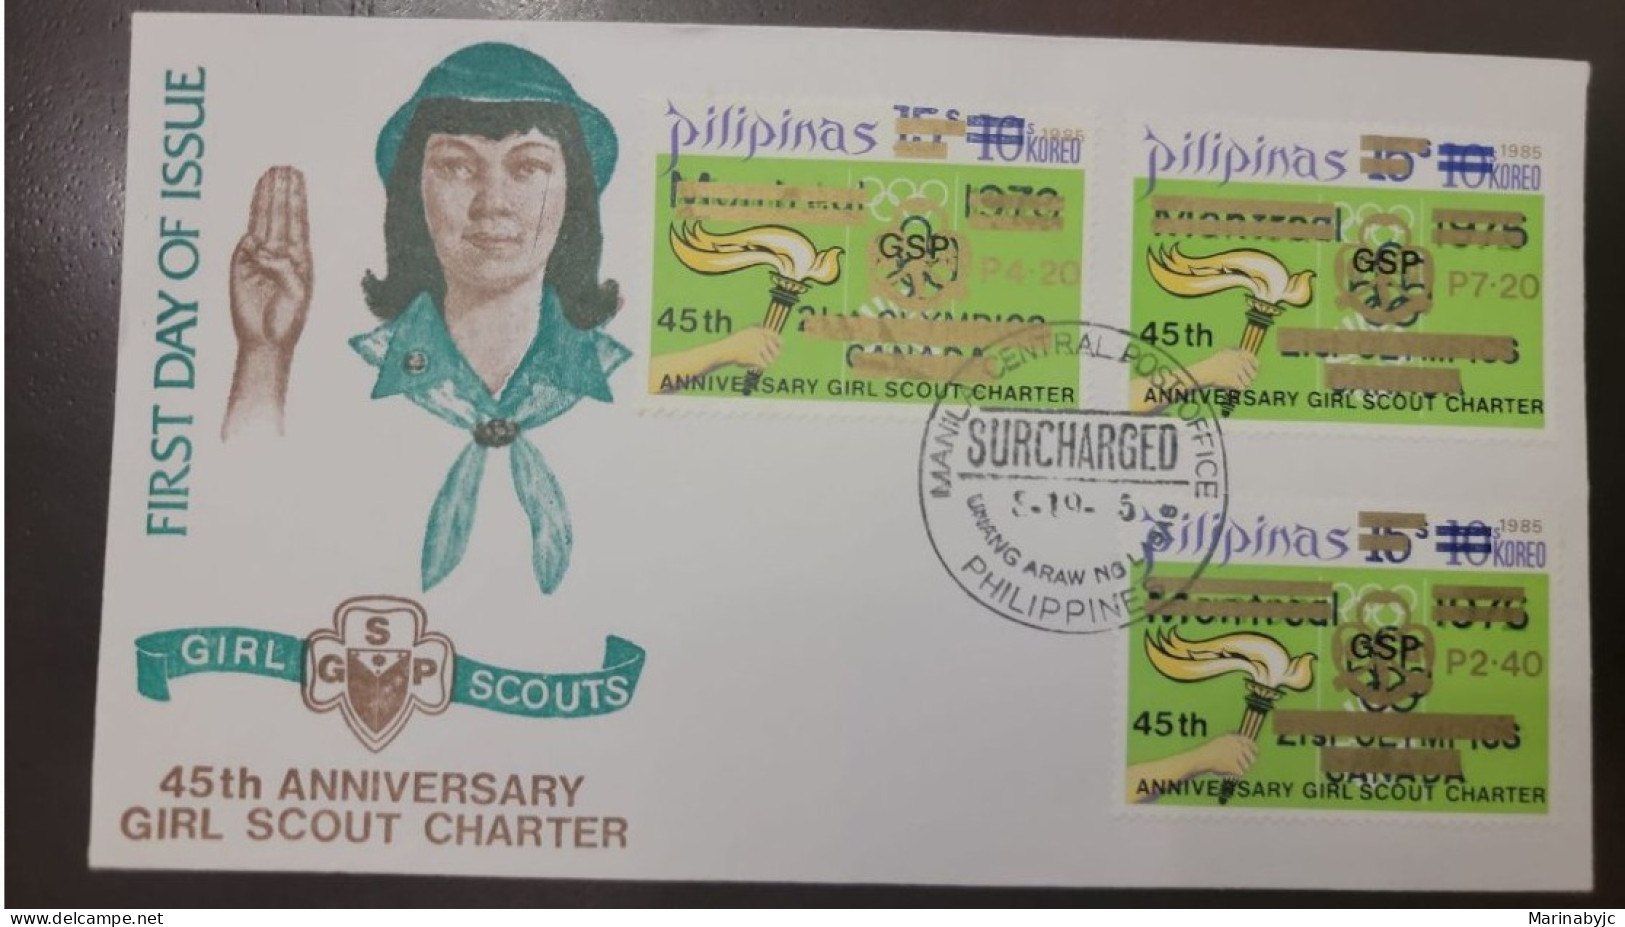 P) 1985 PHILIPPINES, 45TH ANNIVERSARY GIRLS SCOUT CHARTER, SURCHARGED NEW VALUE, ISSUE OF 1976 OVERPRINTED, FDC XF - Philippines